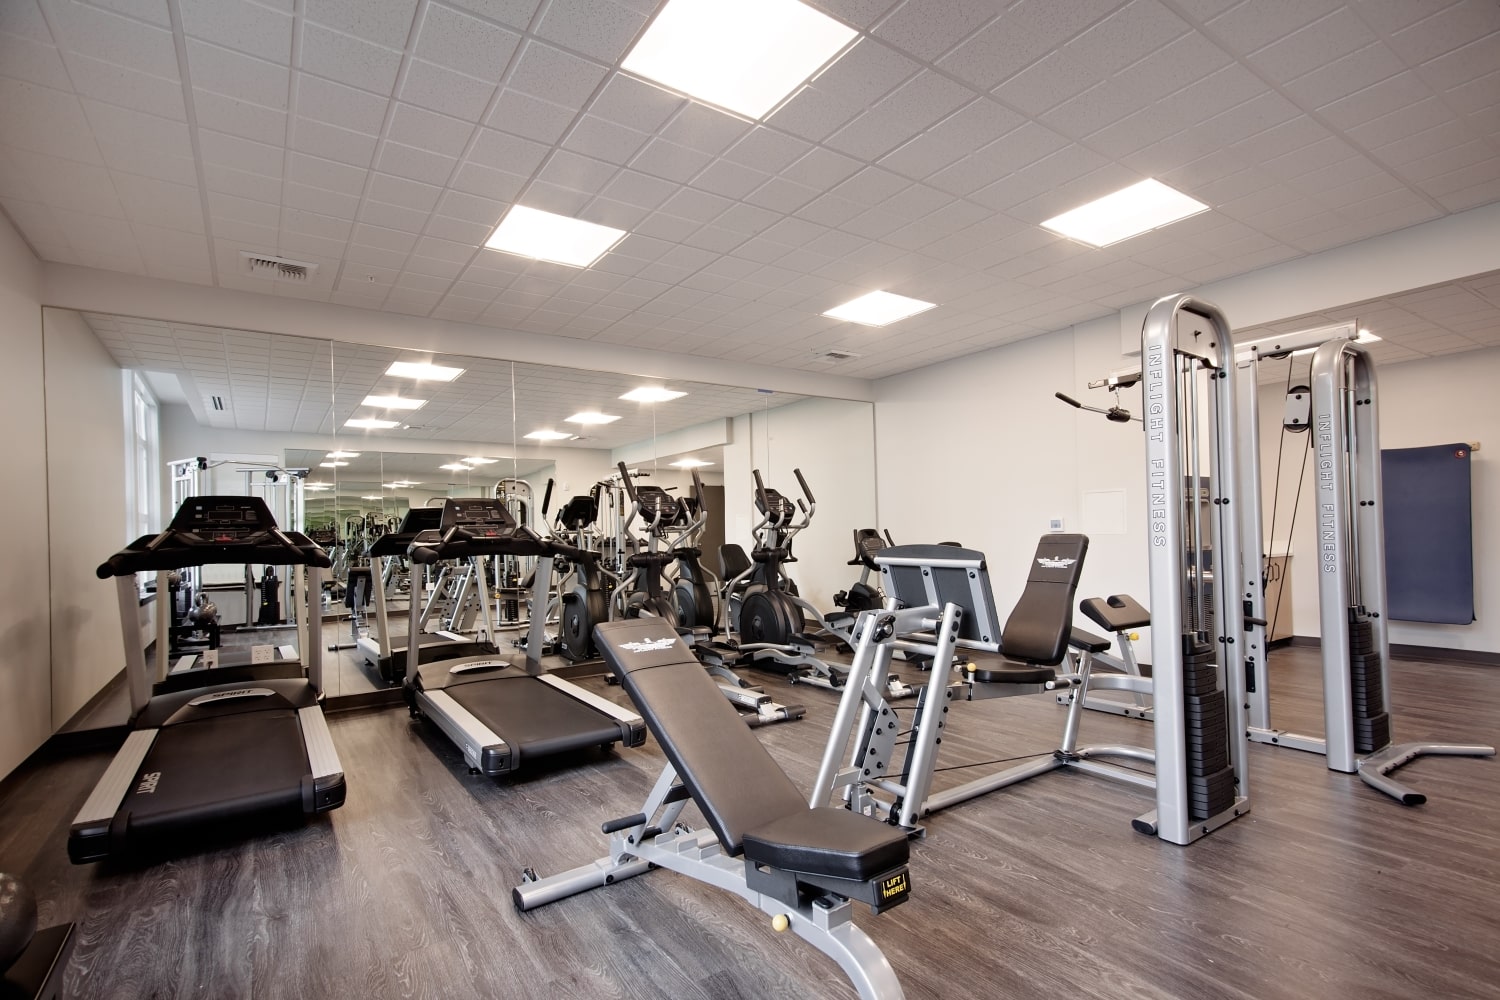 Attwell fitness center with club-quality equipment.